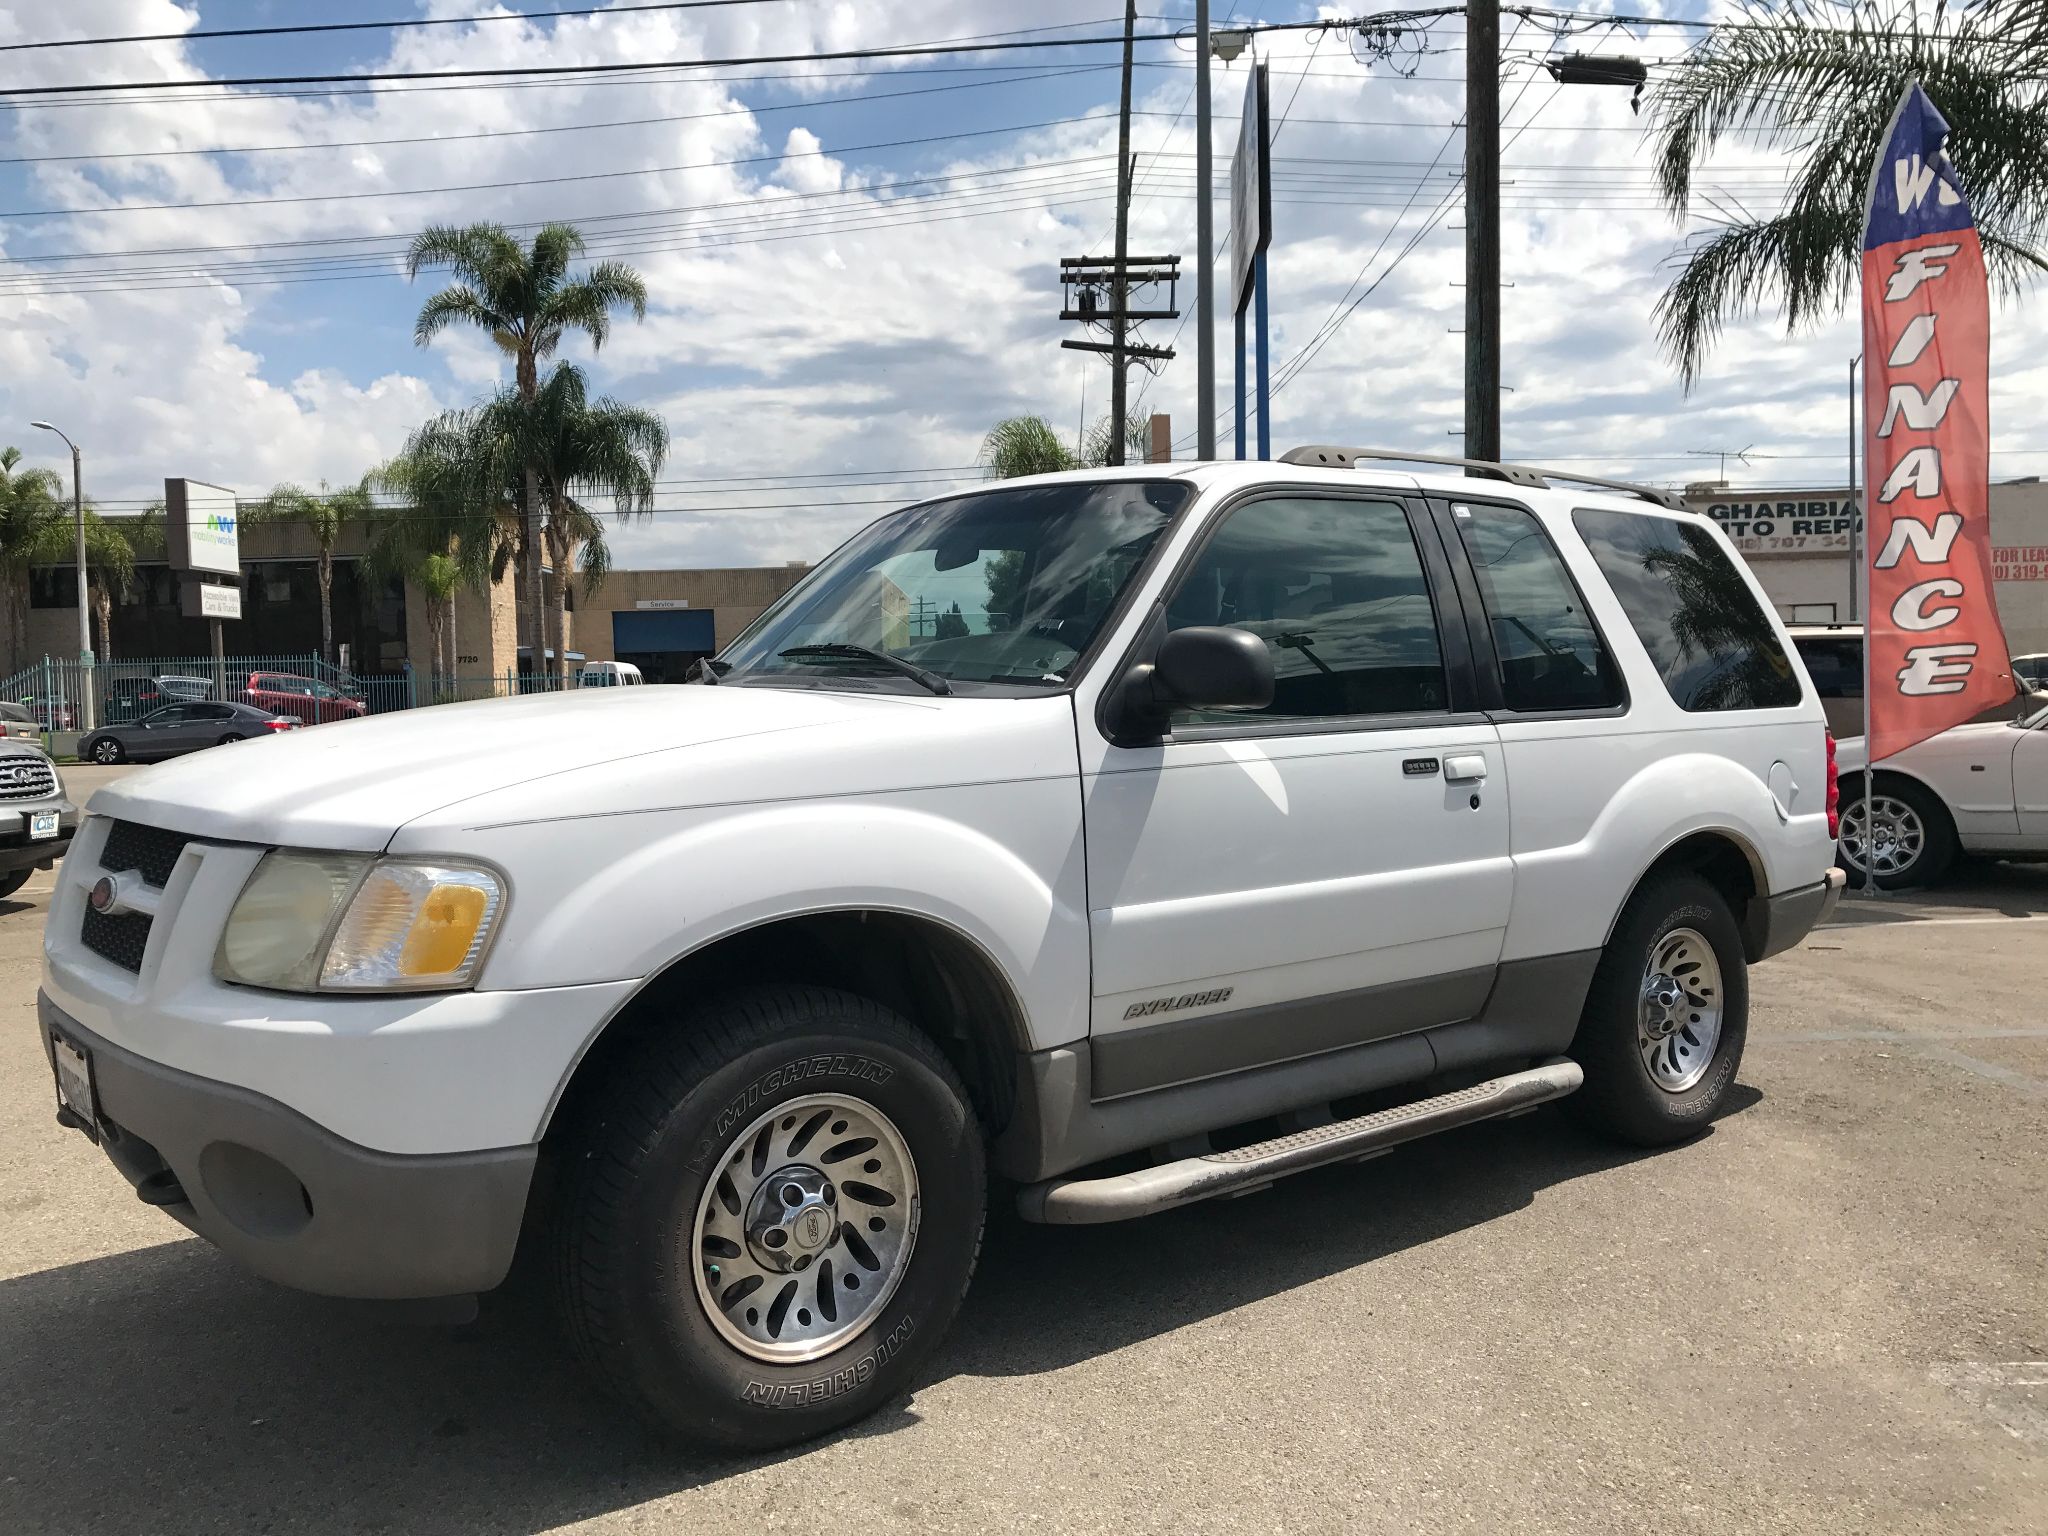 Used 2001 Ford Explorer Sport 2 door at City Cars Warehouse INC